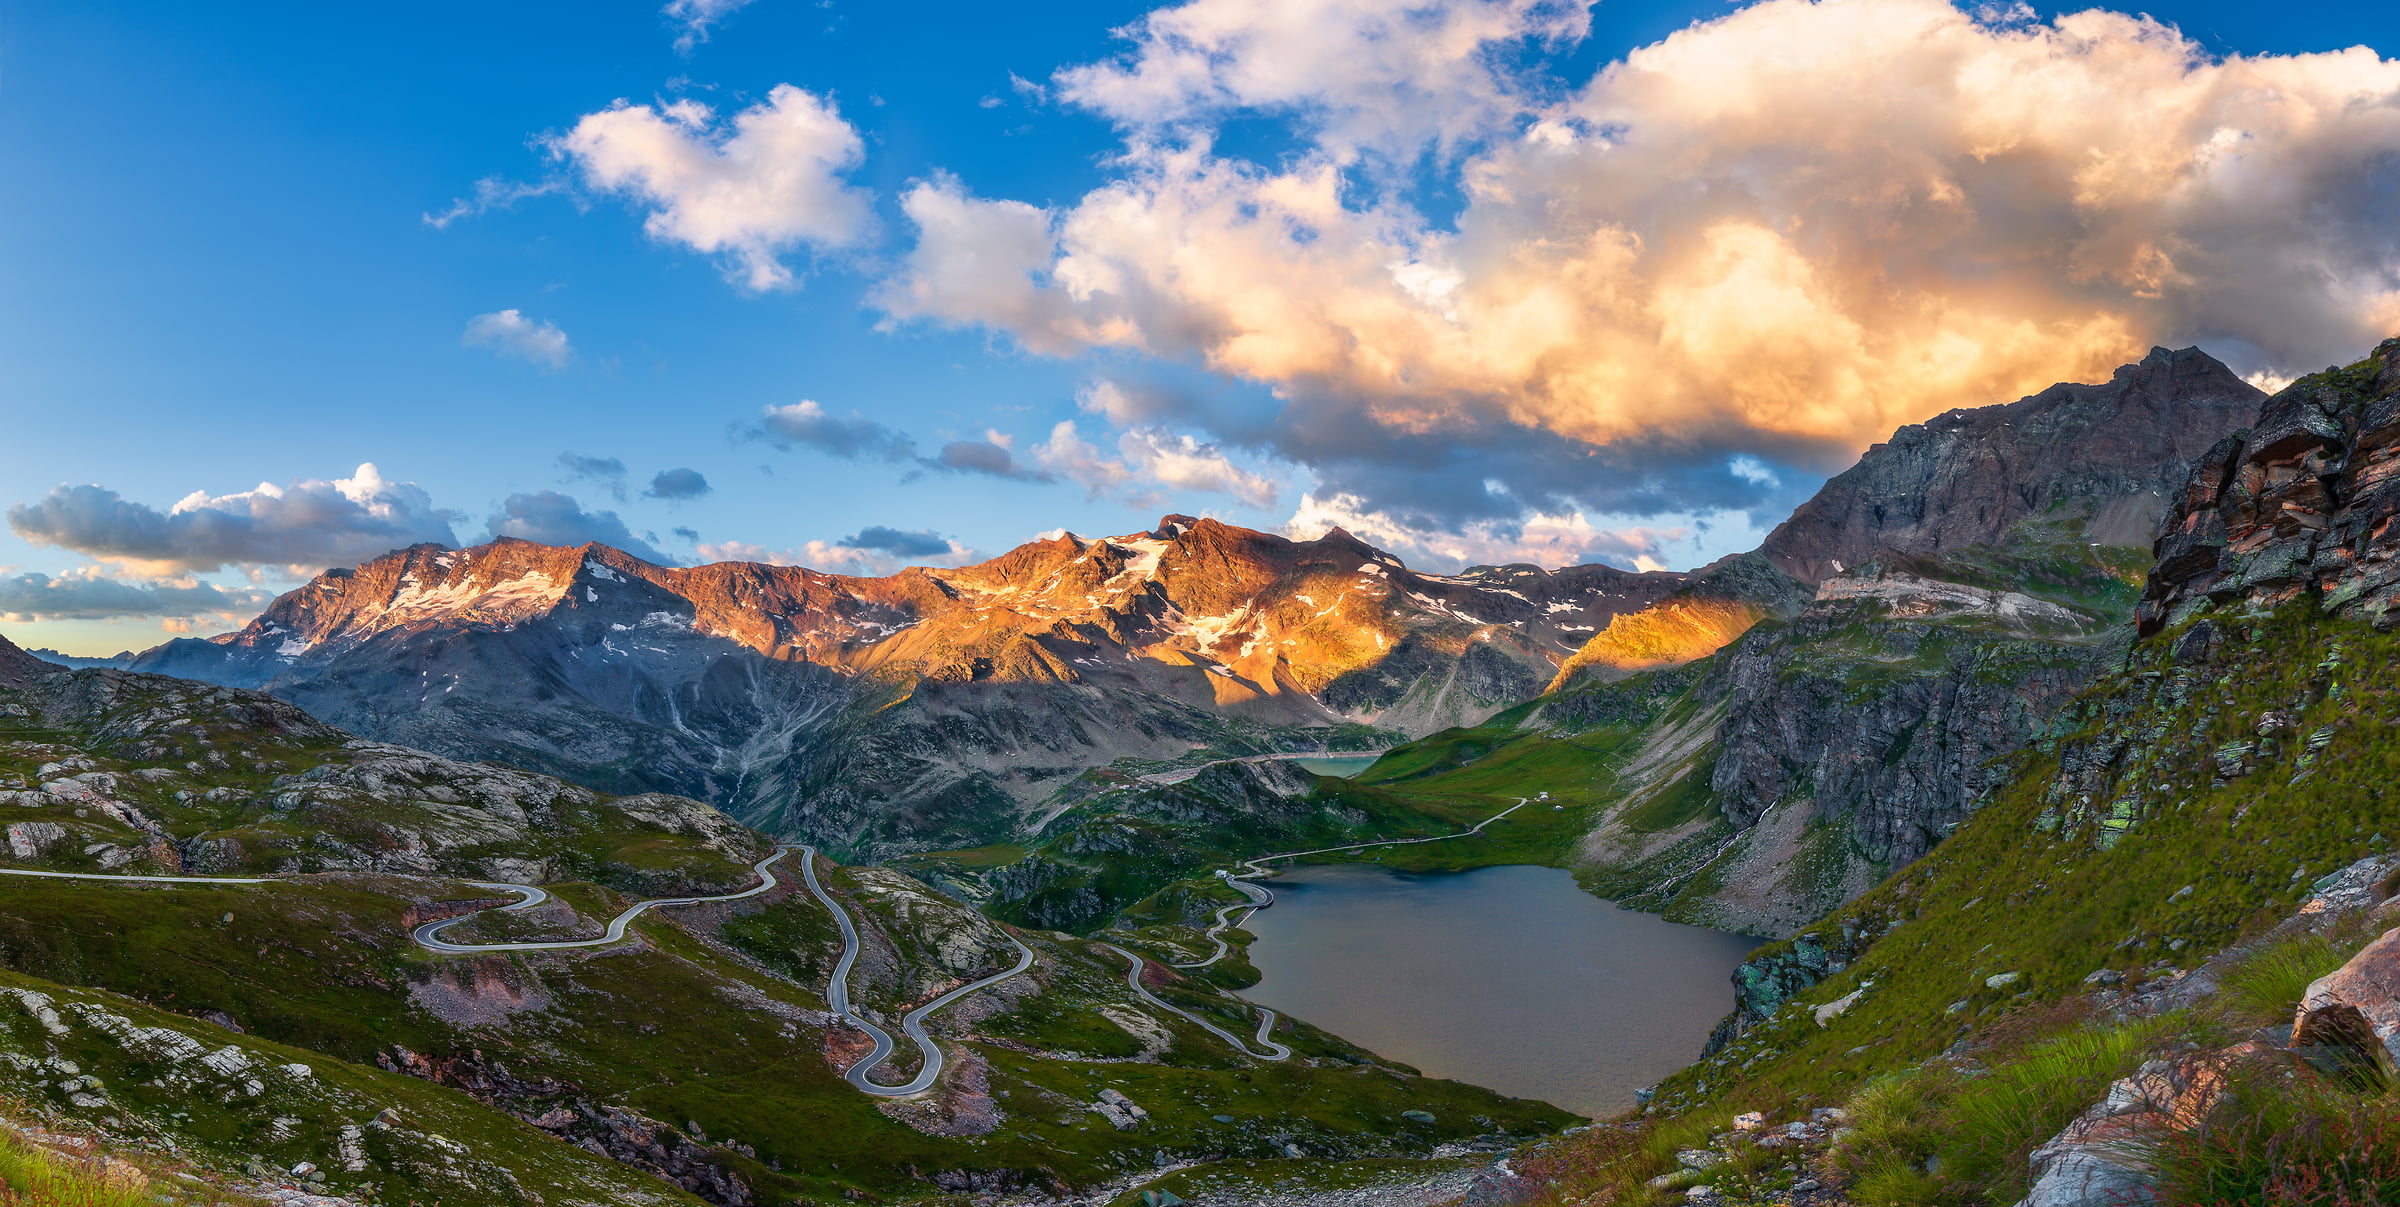 140 megapixels! A very high resolution, large-format VAST photo print of a heavenly landscape with mountains, a lake, a road, and clouds at sunset; photograph created by Duilio Fiorille in Gran Paradiso National Park, Ceresole Reale, Piedmont, Italy.